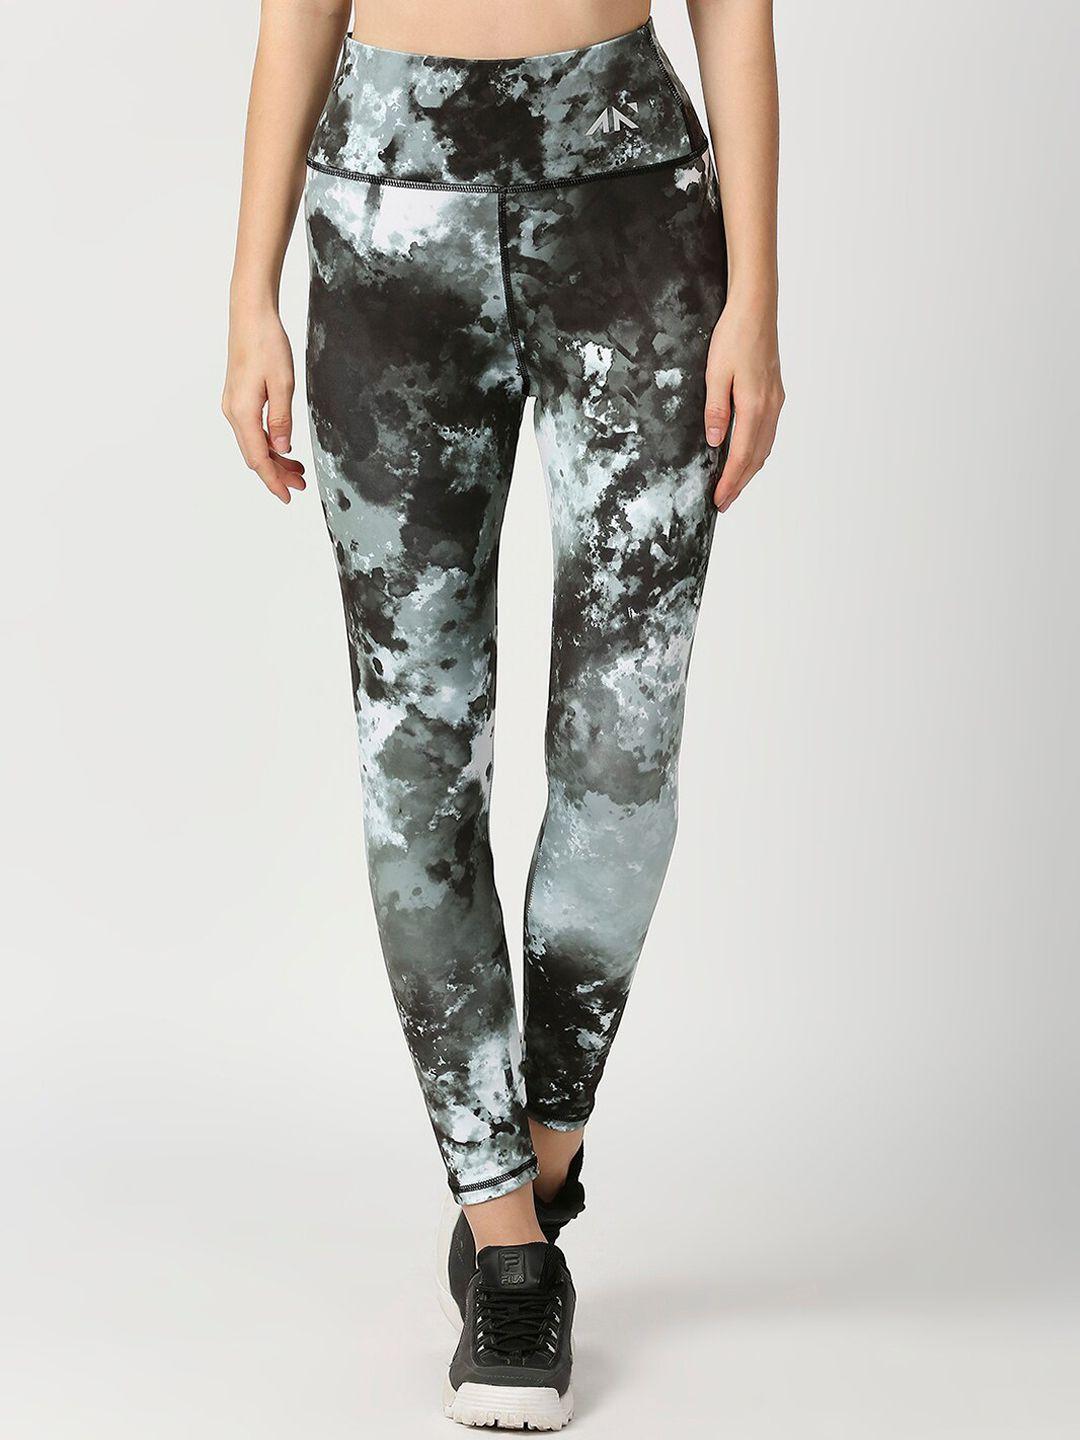 aesthetic nation women white & black printed ankle-length tie dye tights